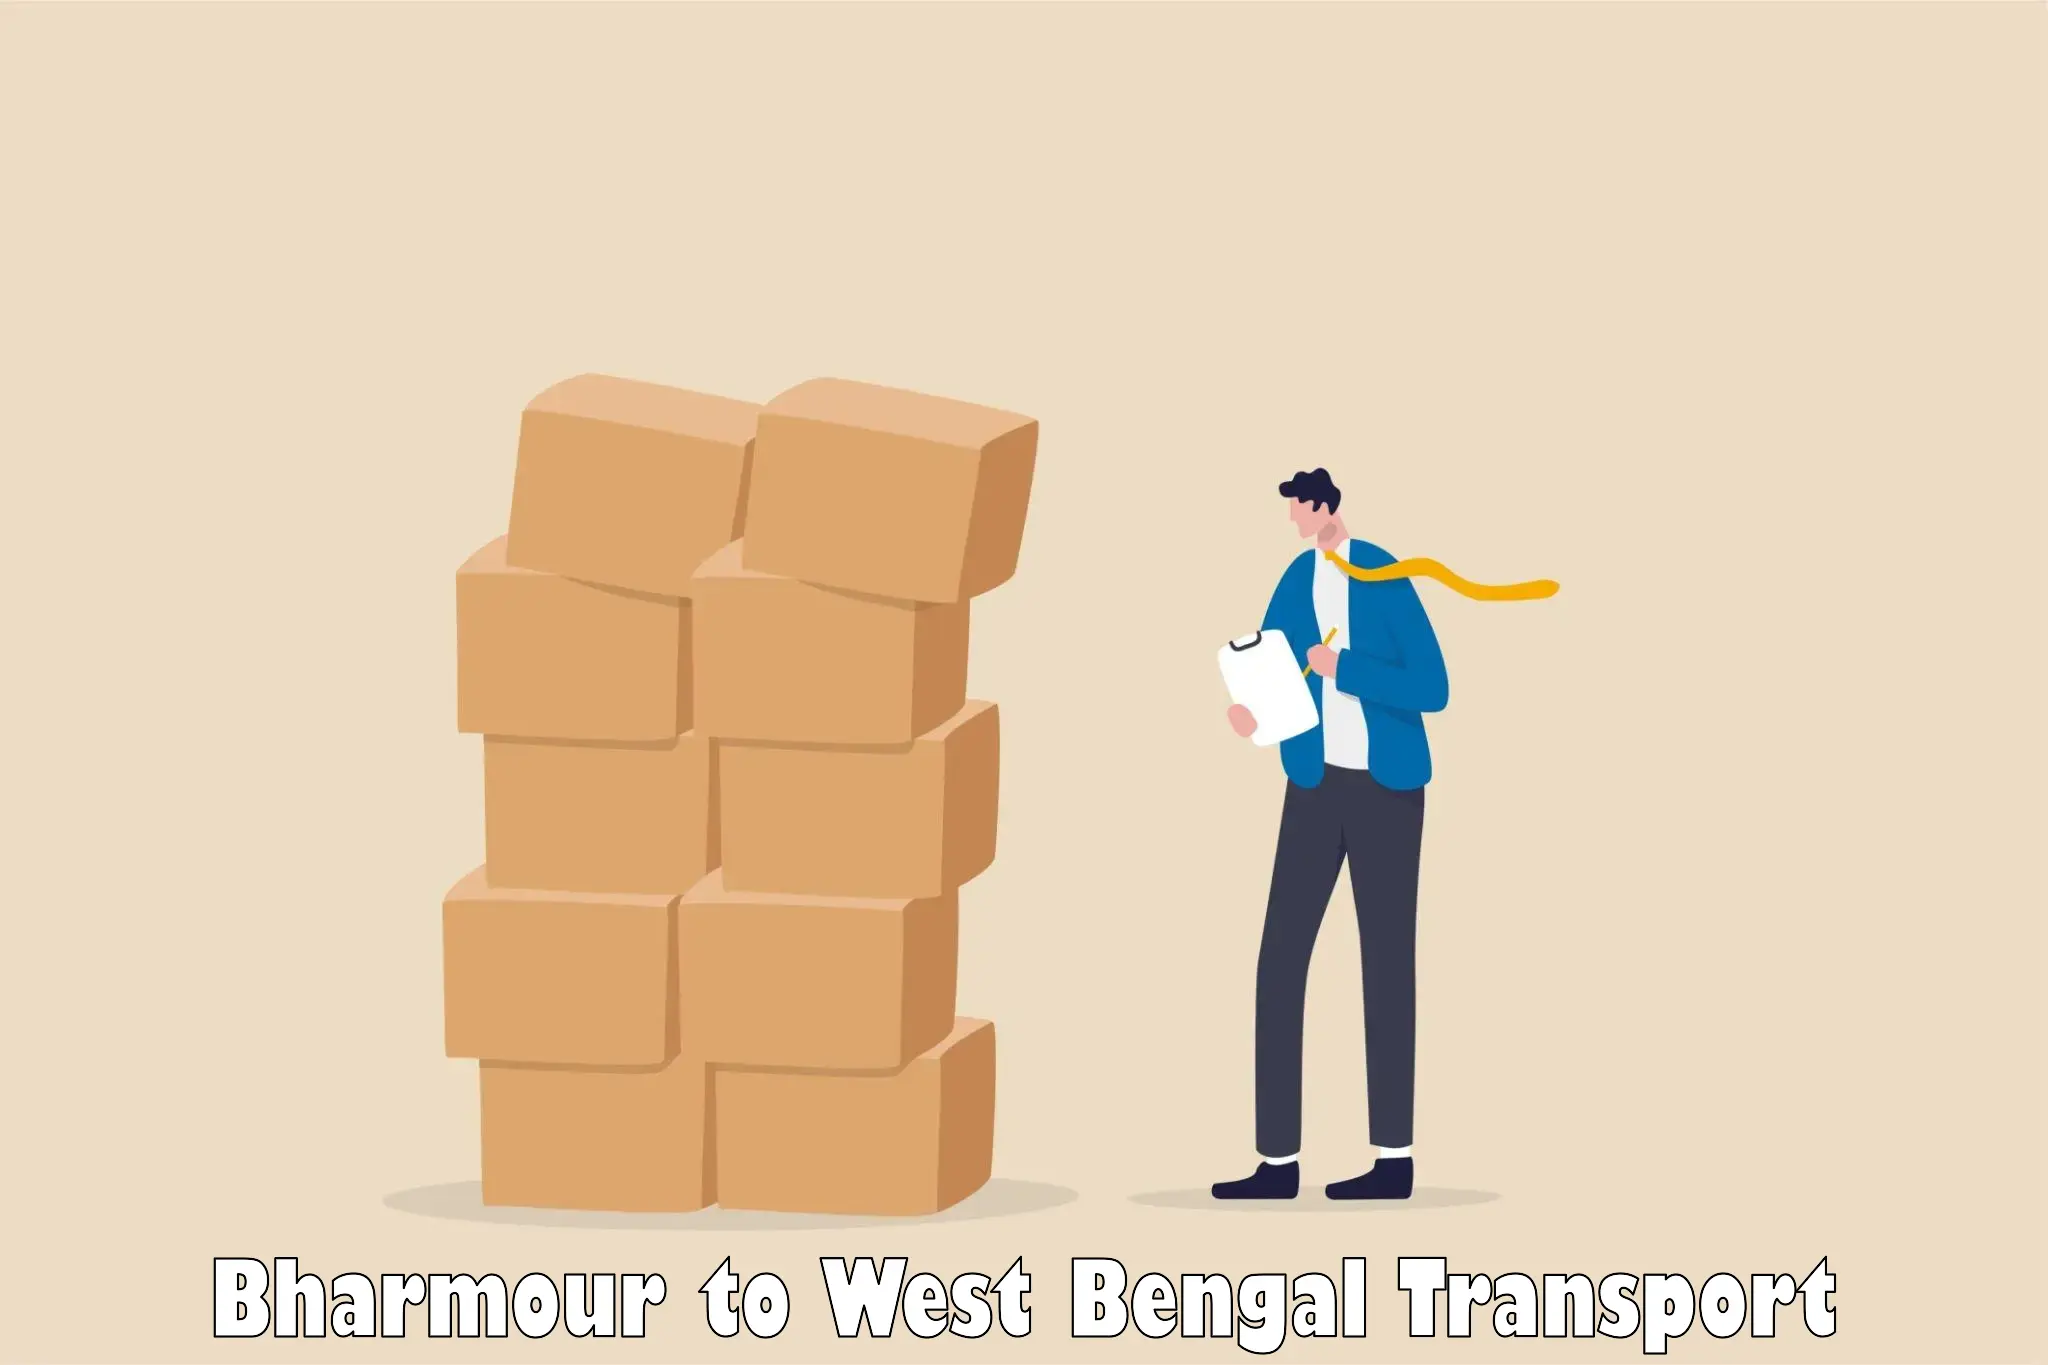 Nearby transport service Bharmour to West Bengal